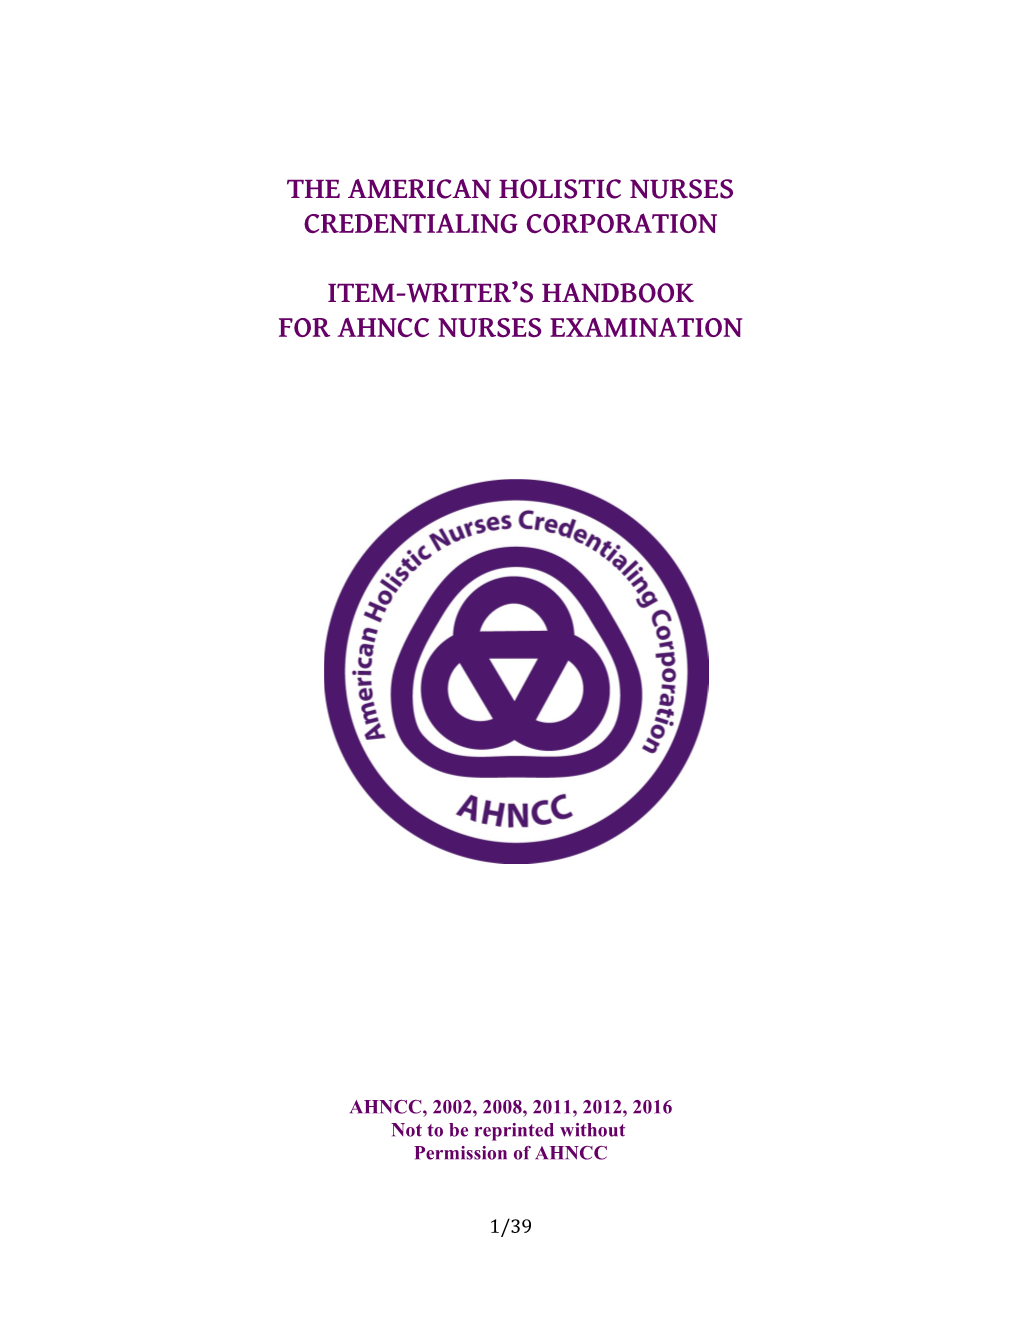 The American Holistic Nurses Credentialing Corporation